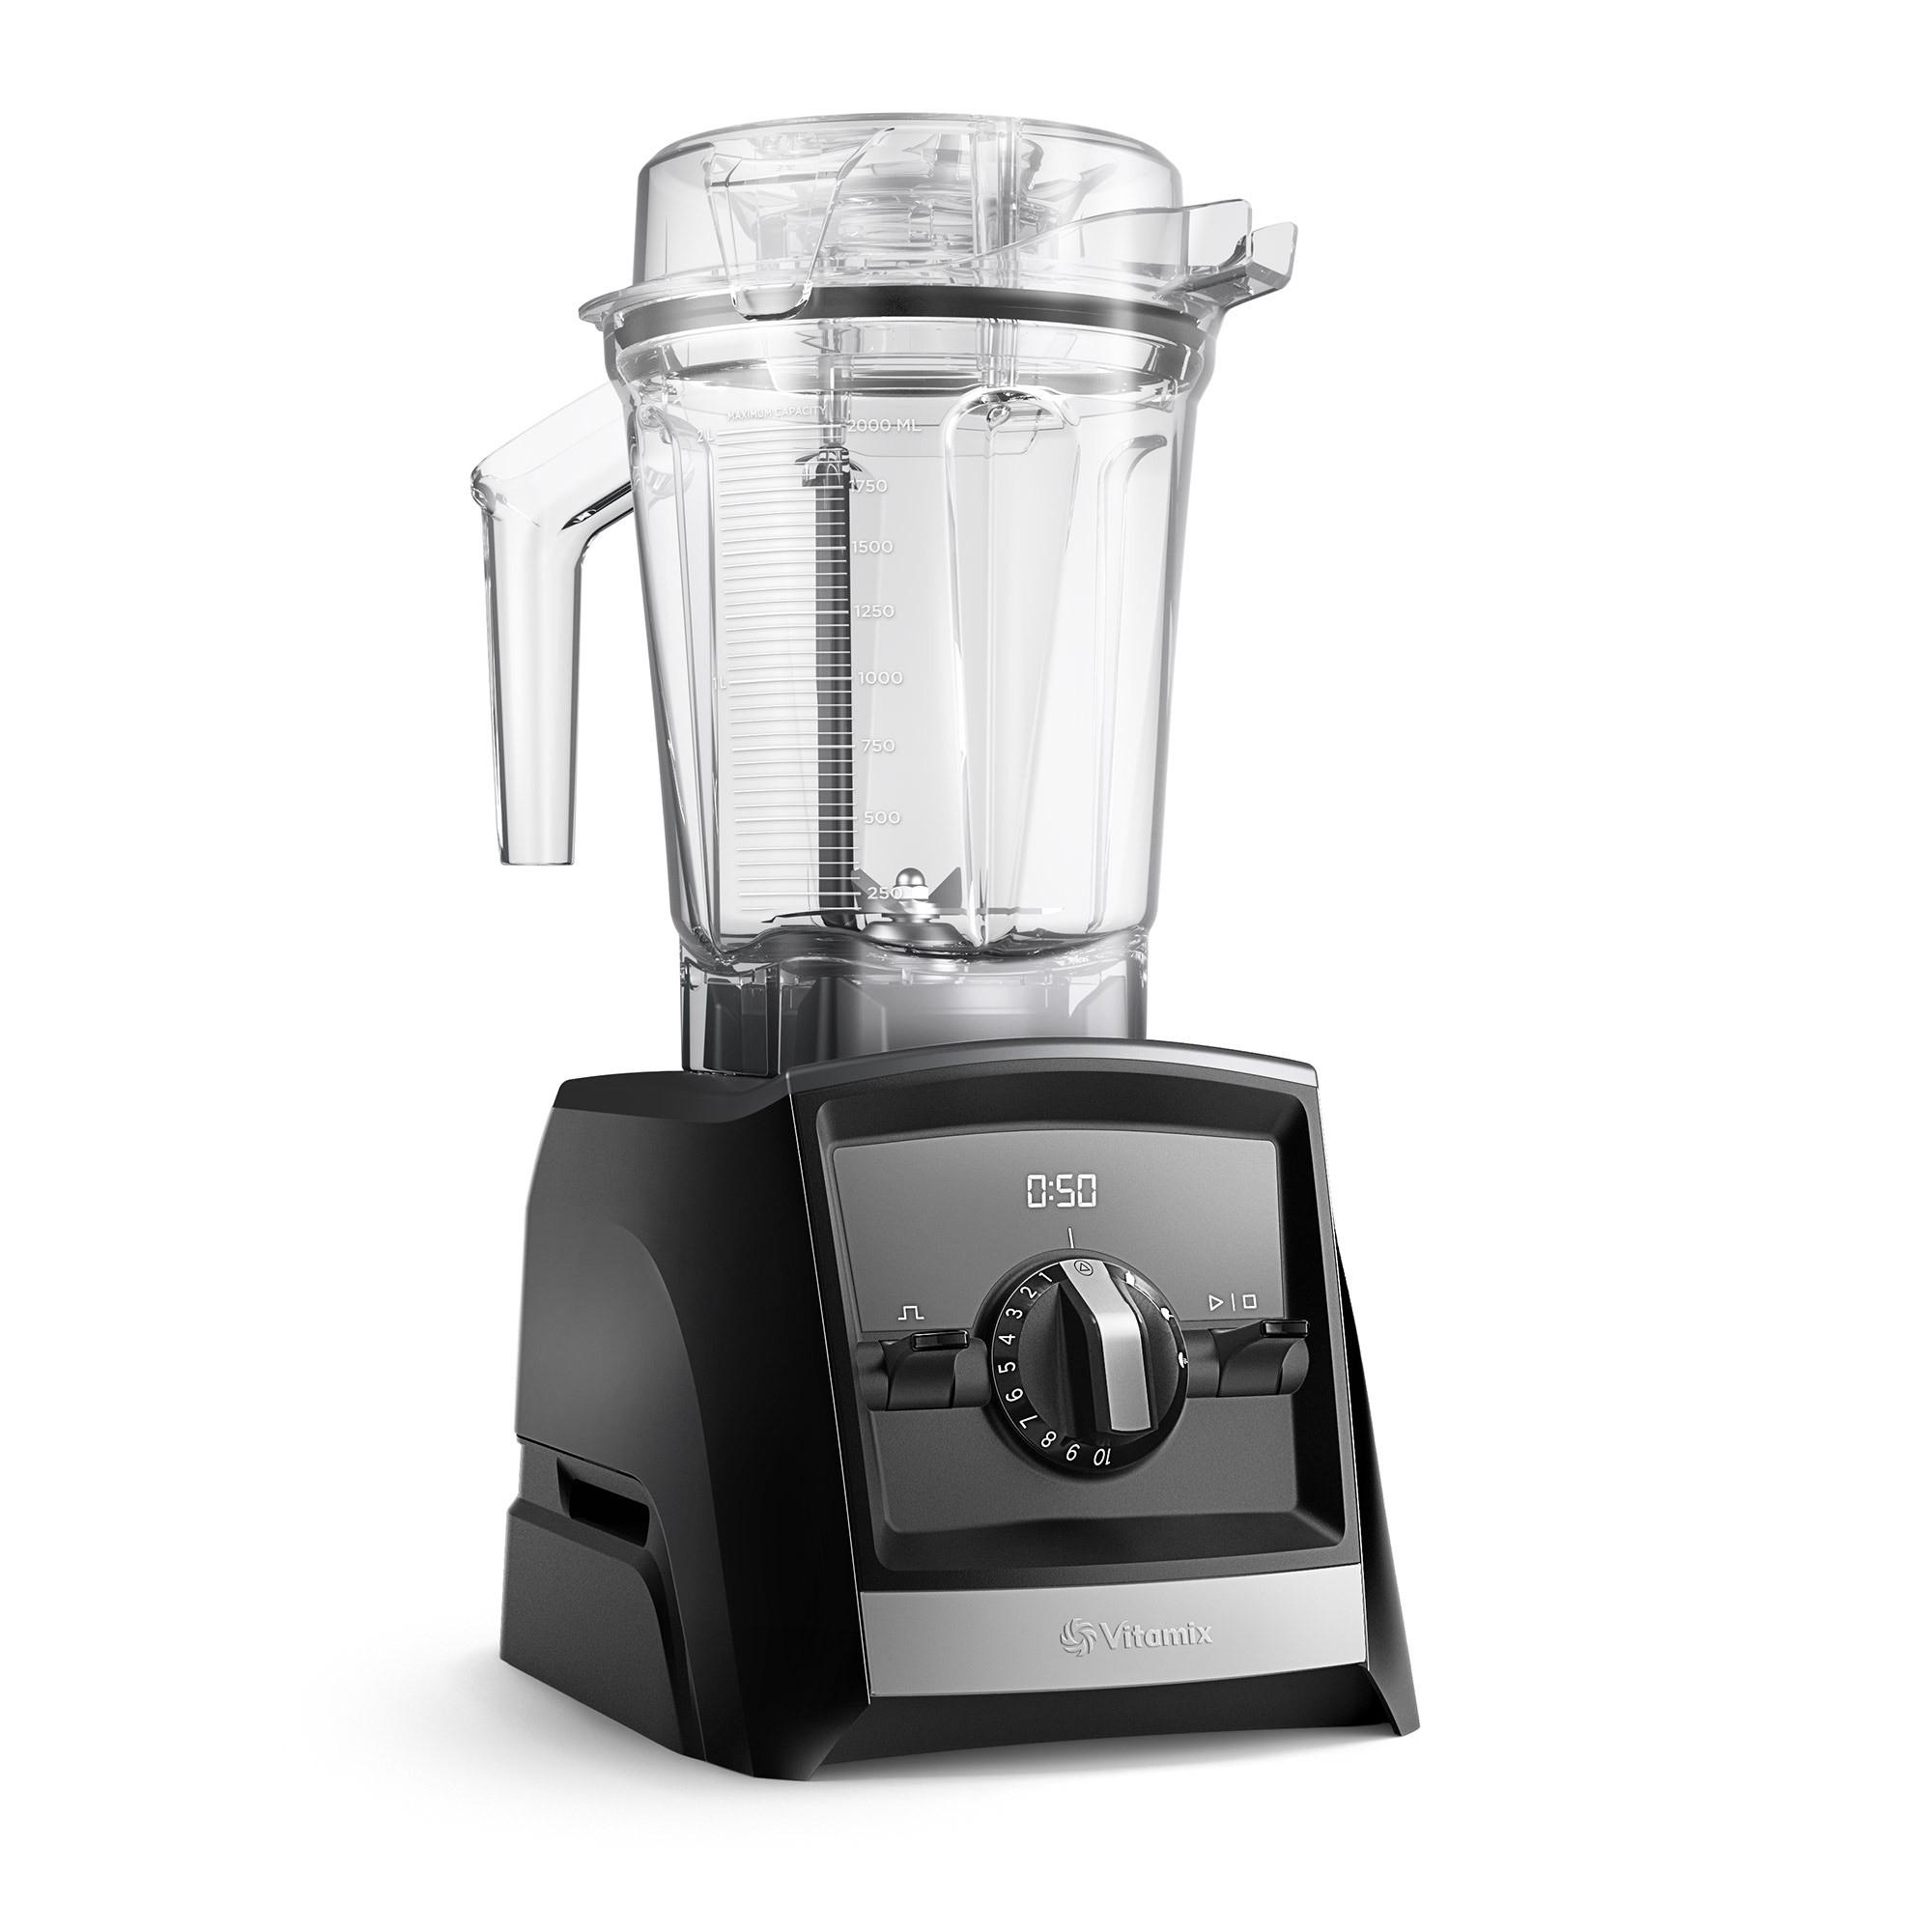 Win a Vitamix S30 High Performance Personal Blender!